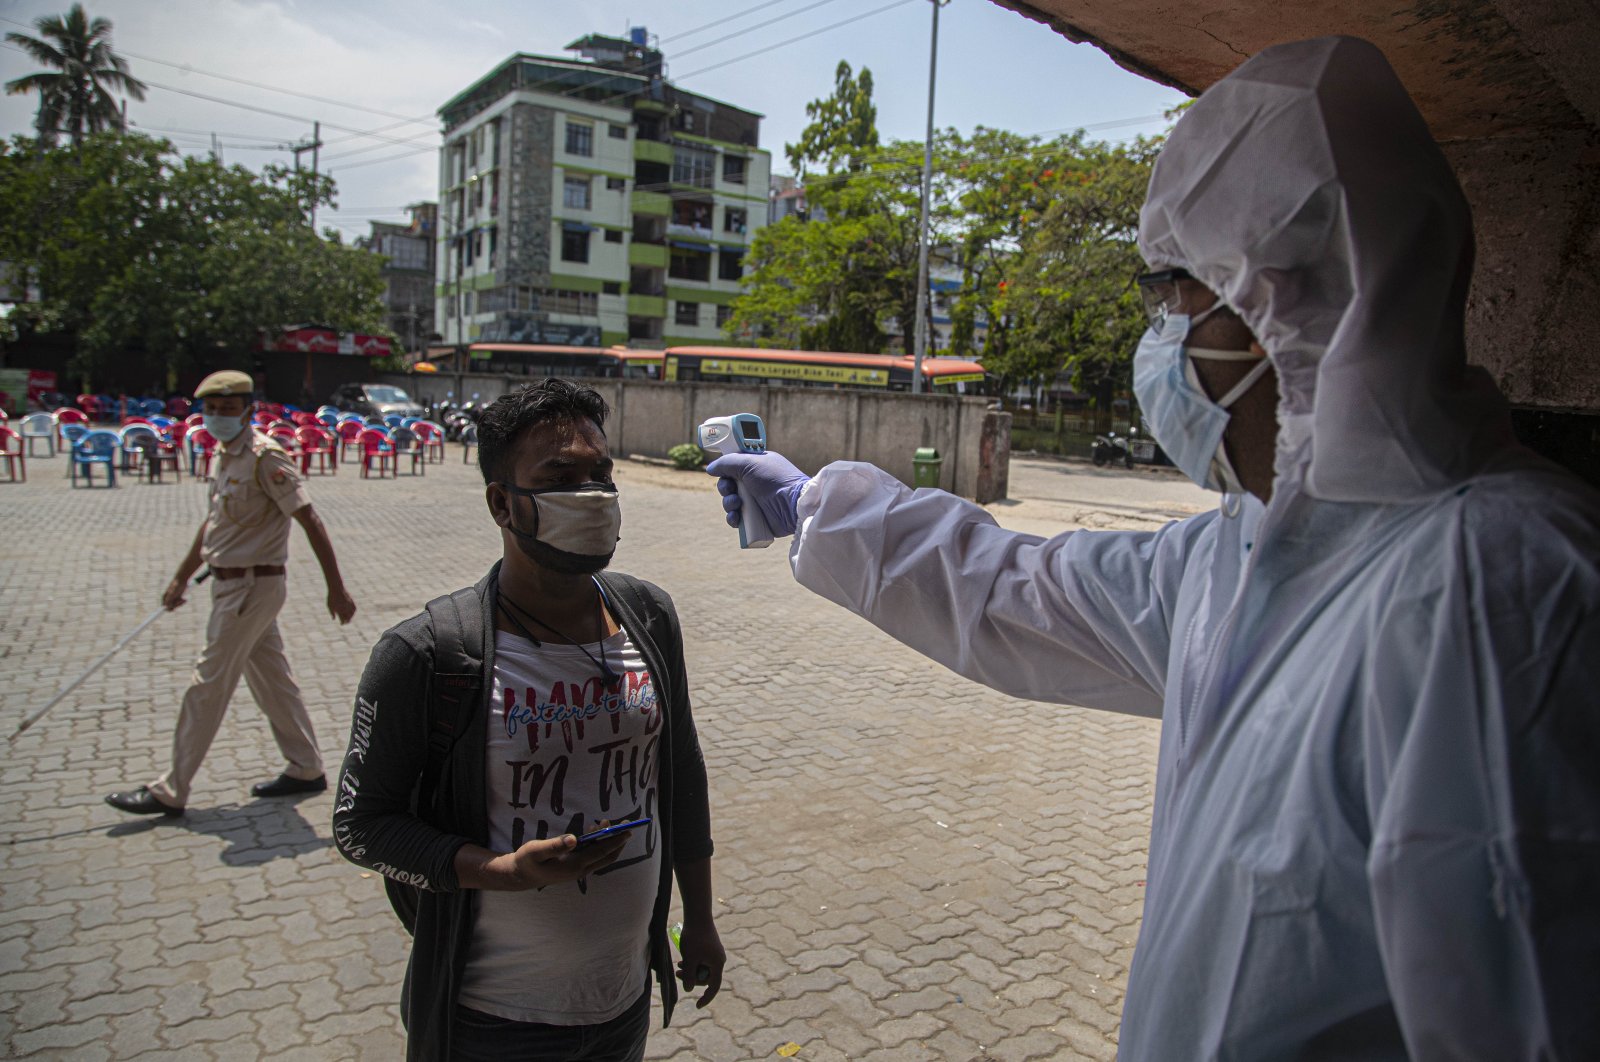 A health worker checks temperature of a passenger as people who were stranded in the city due to the month-long lockdown to curb the spread of new coronavirus, arrive to board special buses to their villages in Gauhati, India, April 27, 2020. (AP Photo)